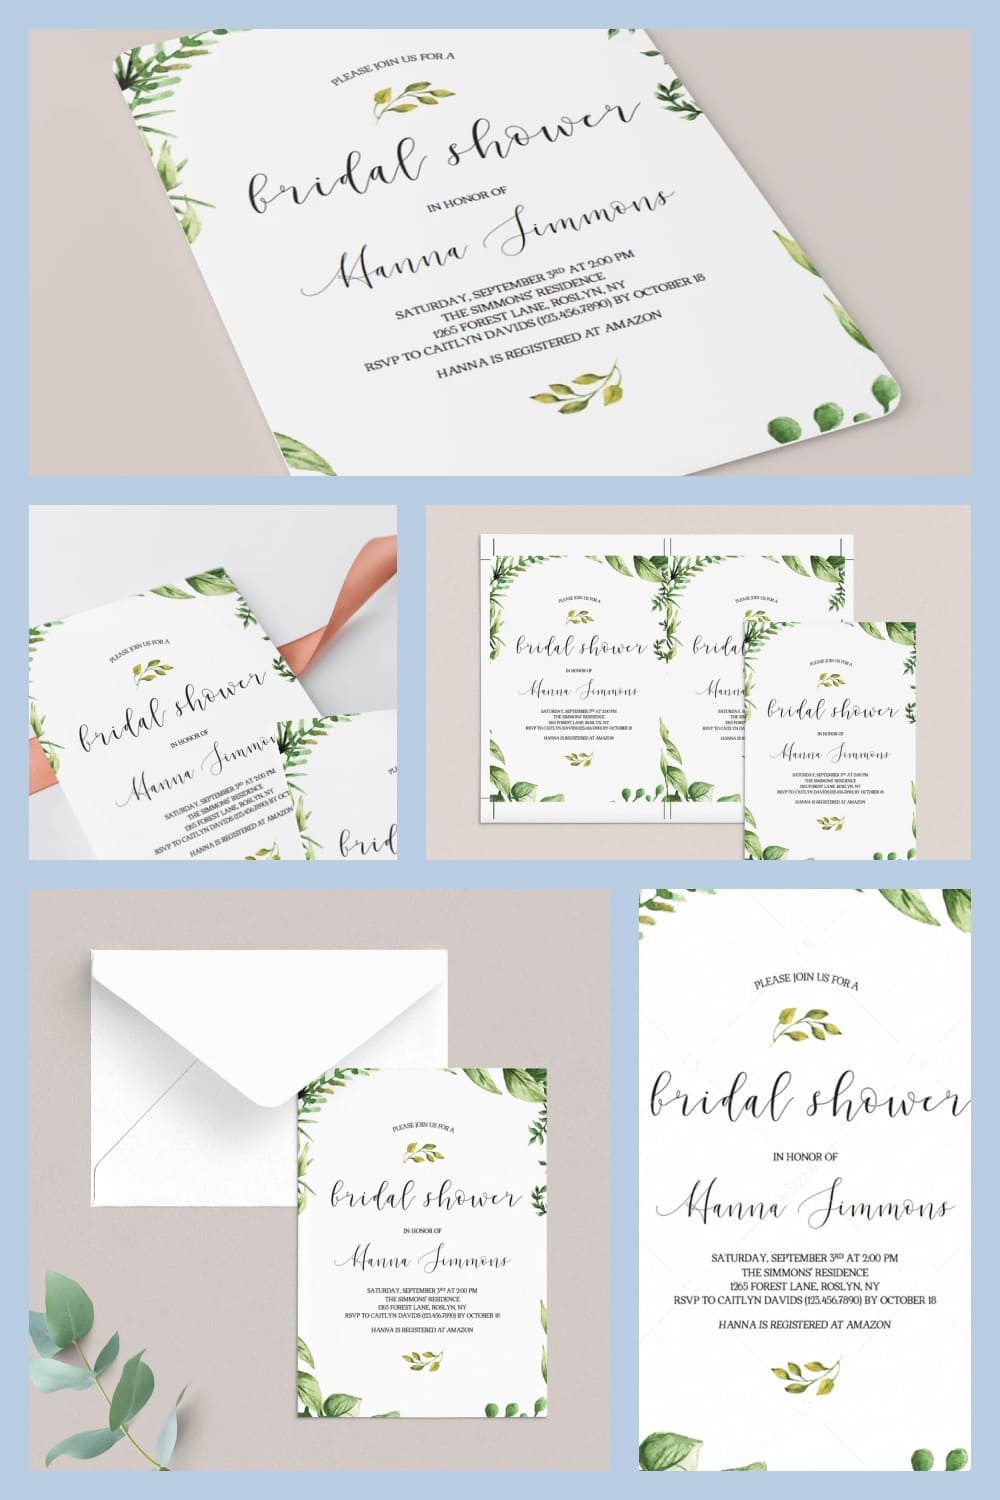 It's watercolor green leaves, this invitation is perfect for a garden themed bridal party.